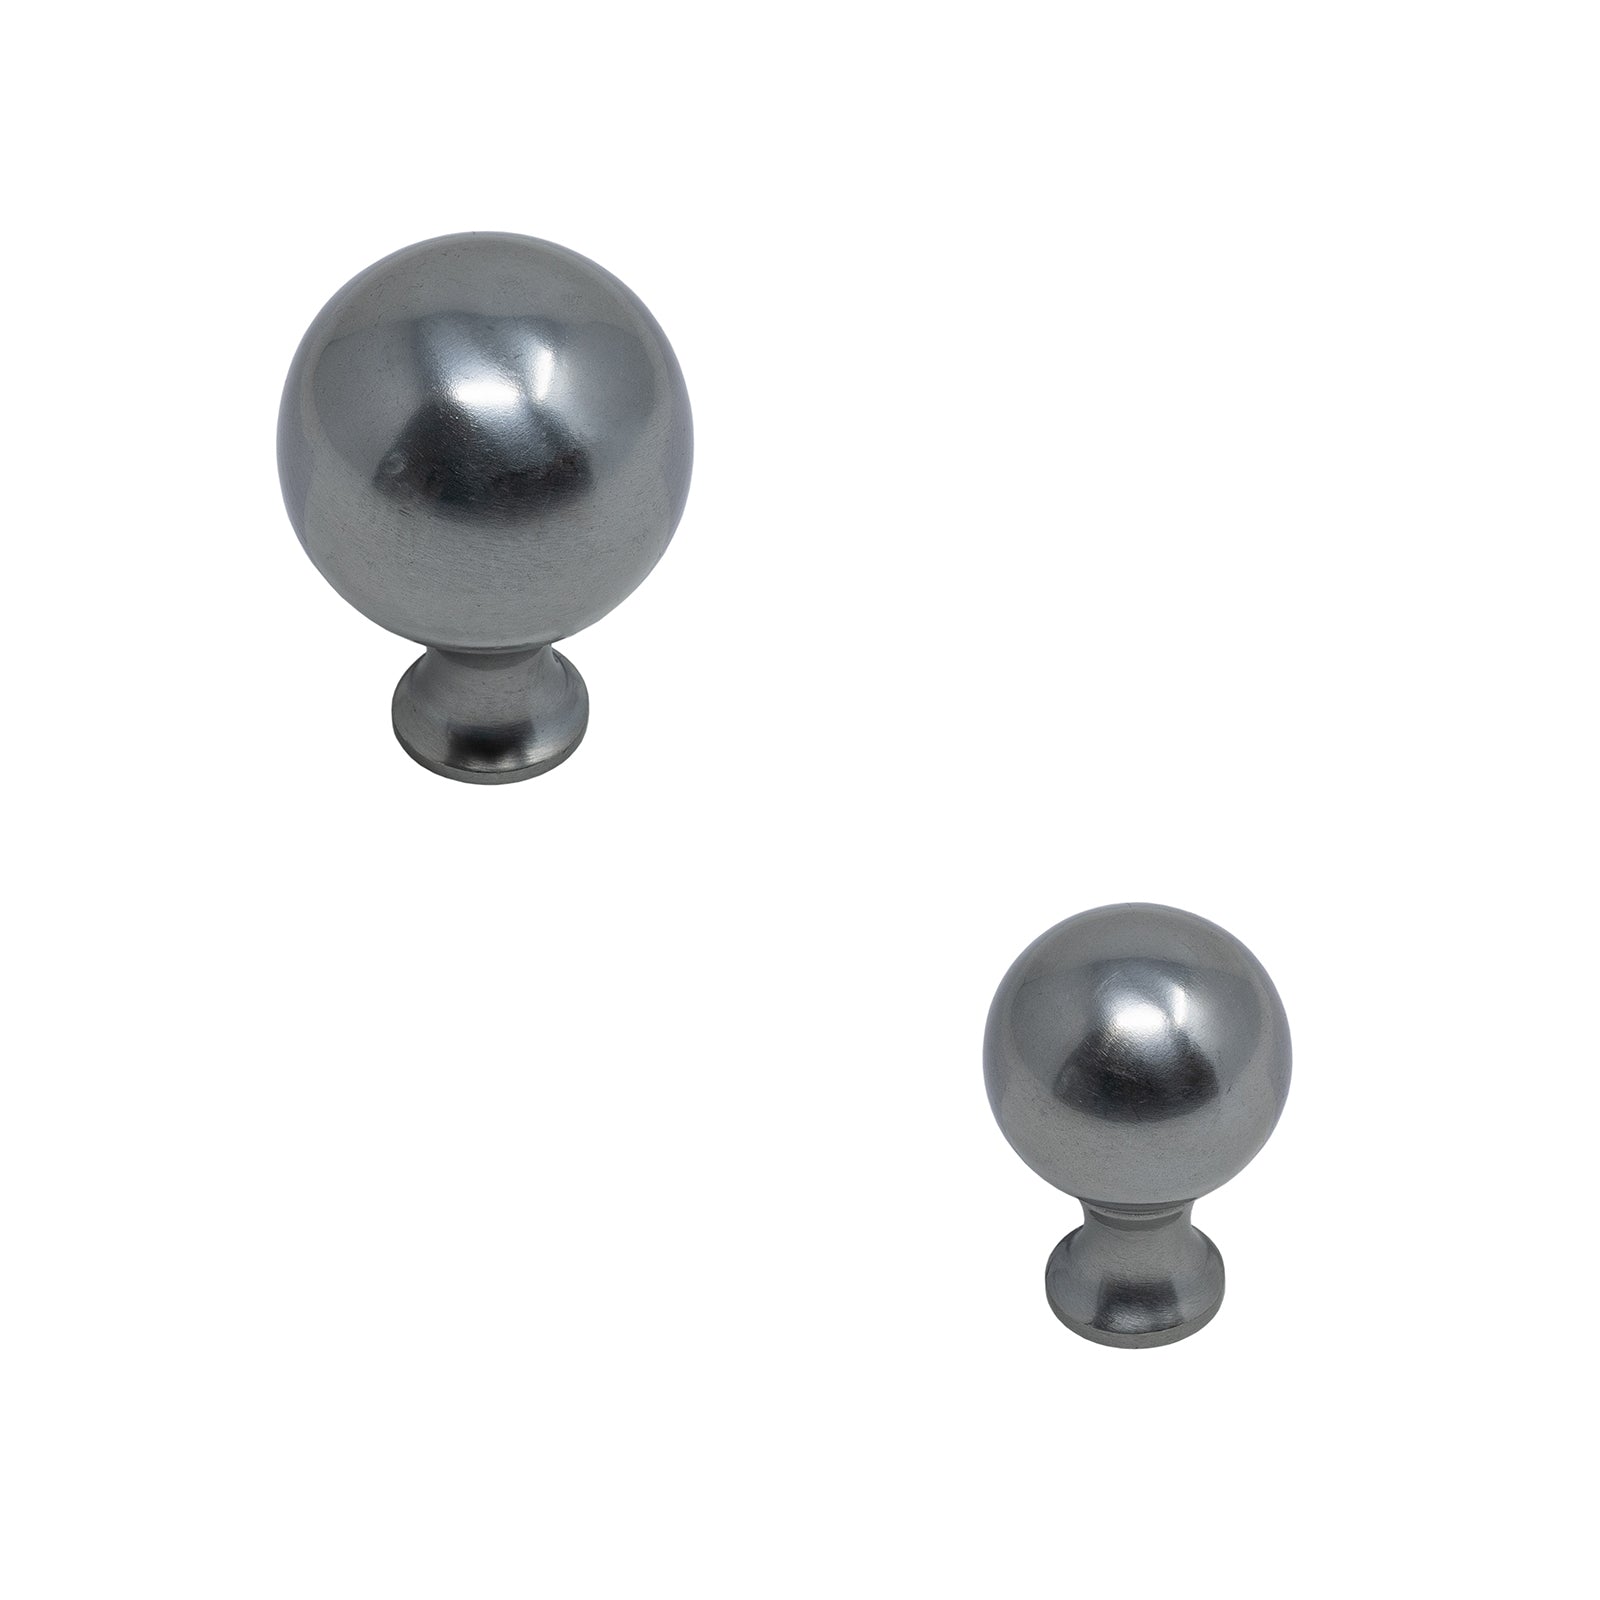 Cast Iron Ball Cabinet Knobs in two sizes